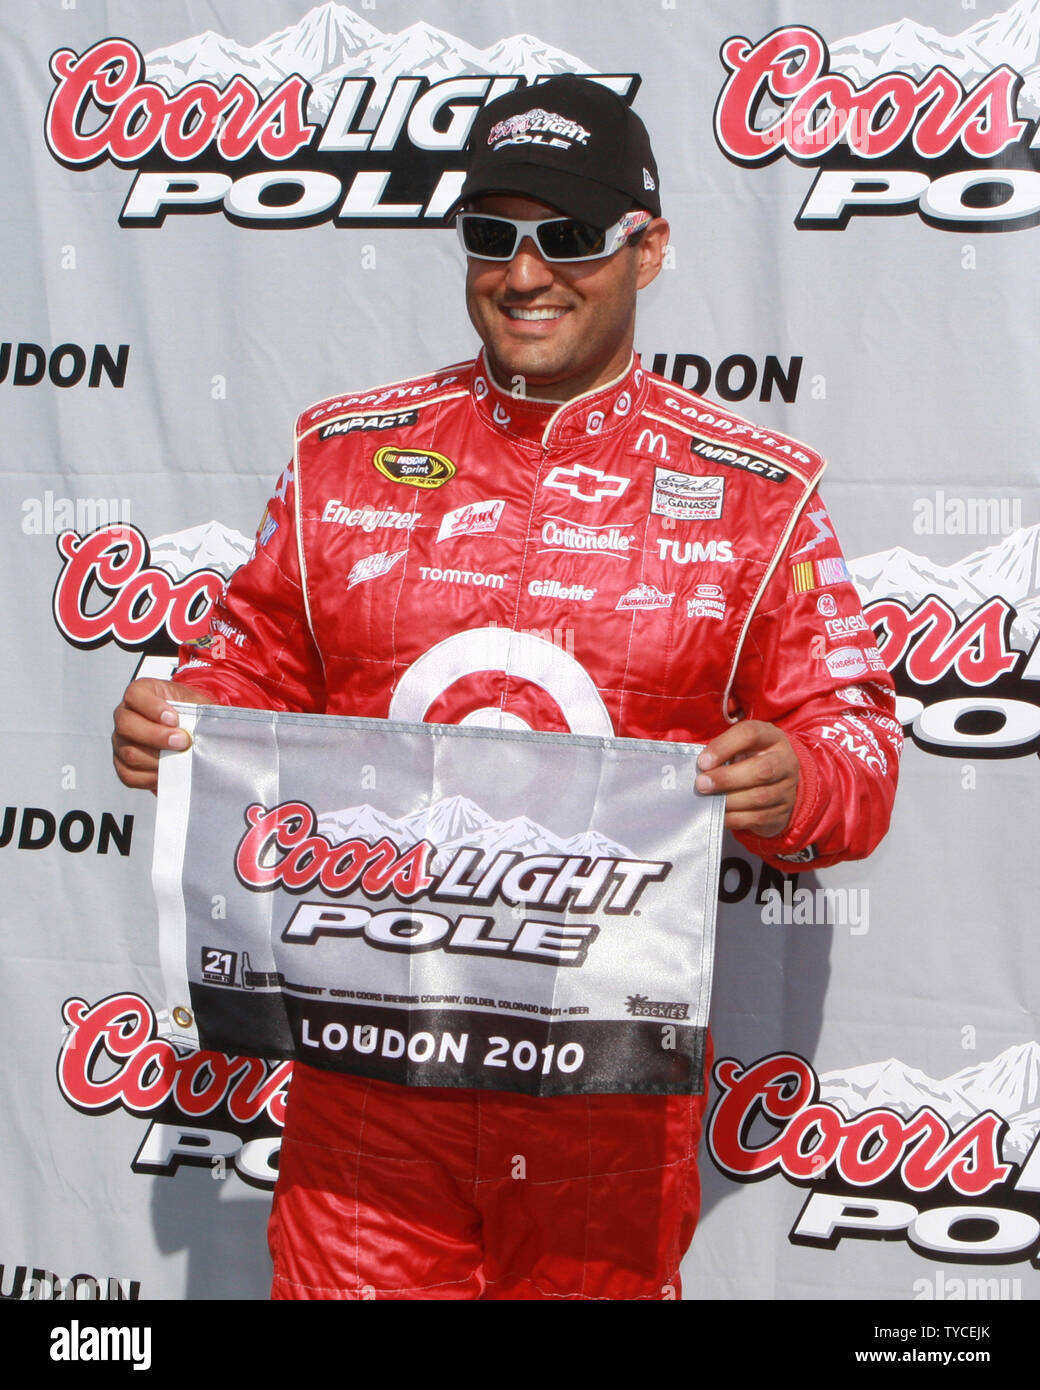 Juan Pablo Montoya celebrates winning the pole award for the NASCAR Sprint Cup Series LENOX Industrial Tools 301 at New Hampshire Motor Speedway in Loudon,New Hampshire on June 25, 2010. UPI Photo/Malcolm Hope Stock Photo